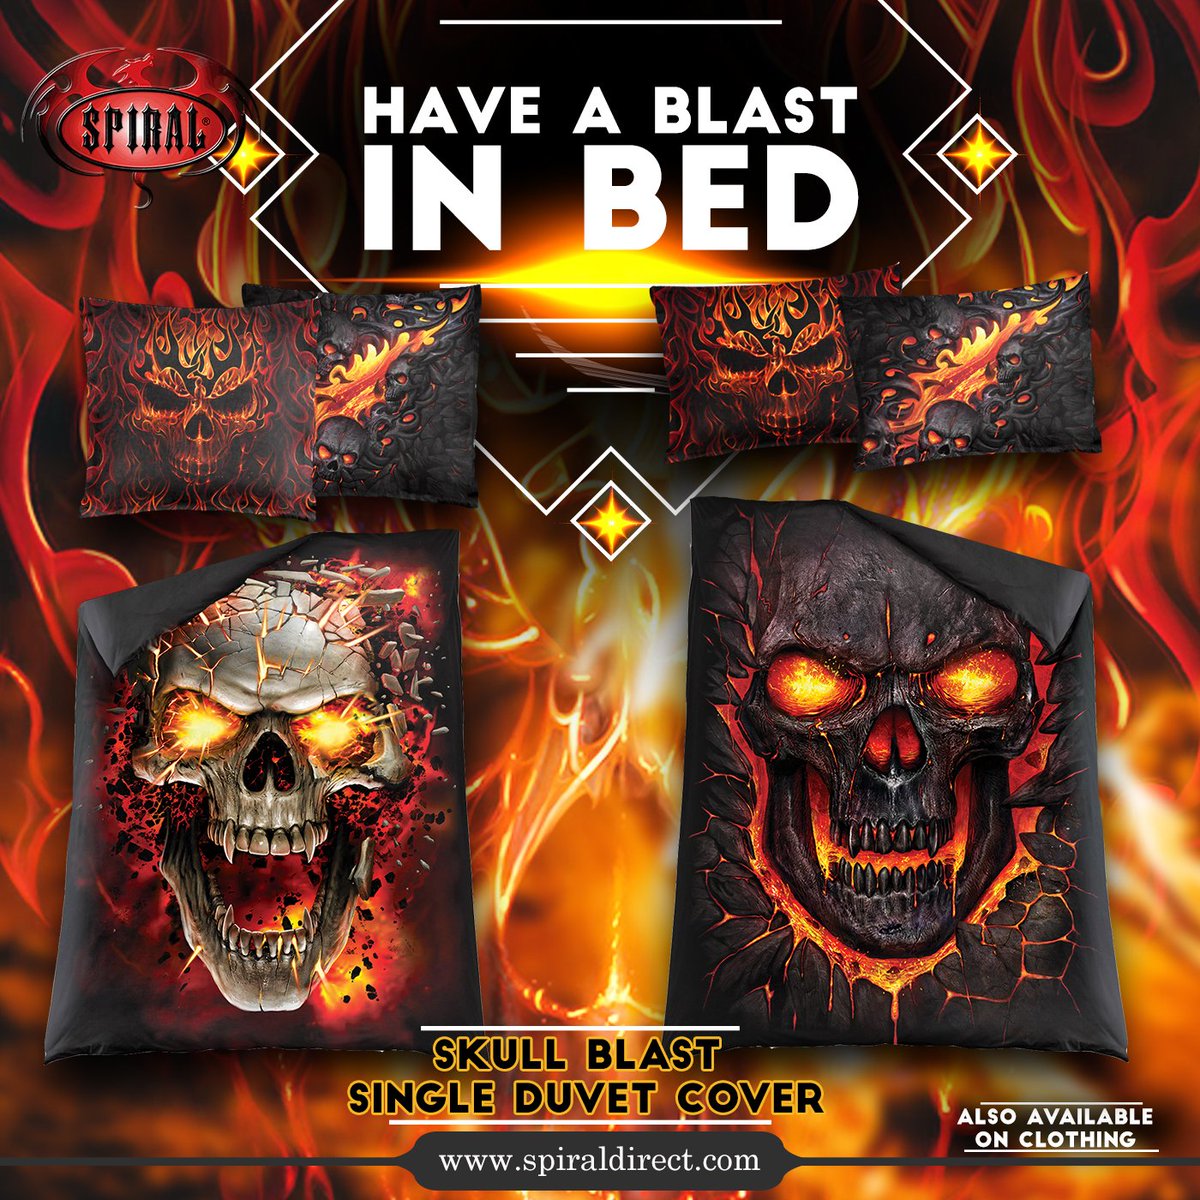 and double duvet and pillow sets. This explosive design is also available on a wide range of clothing and accessories. Have a BLAST! spiraldirect.com/shop?search=sk…
#SpiralDirect #GothicBedding #Skulls